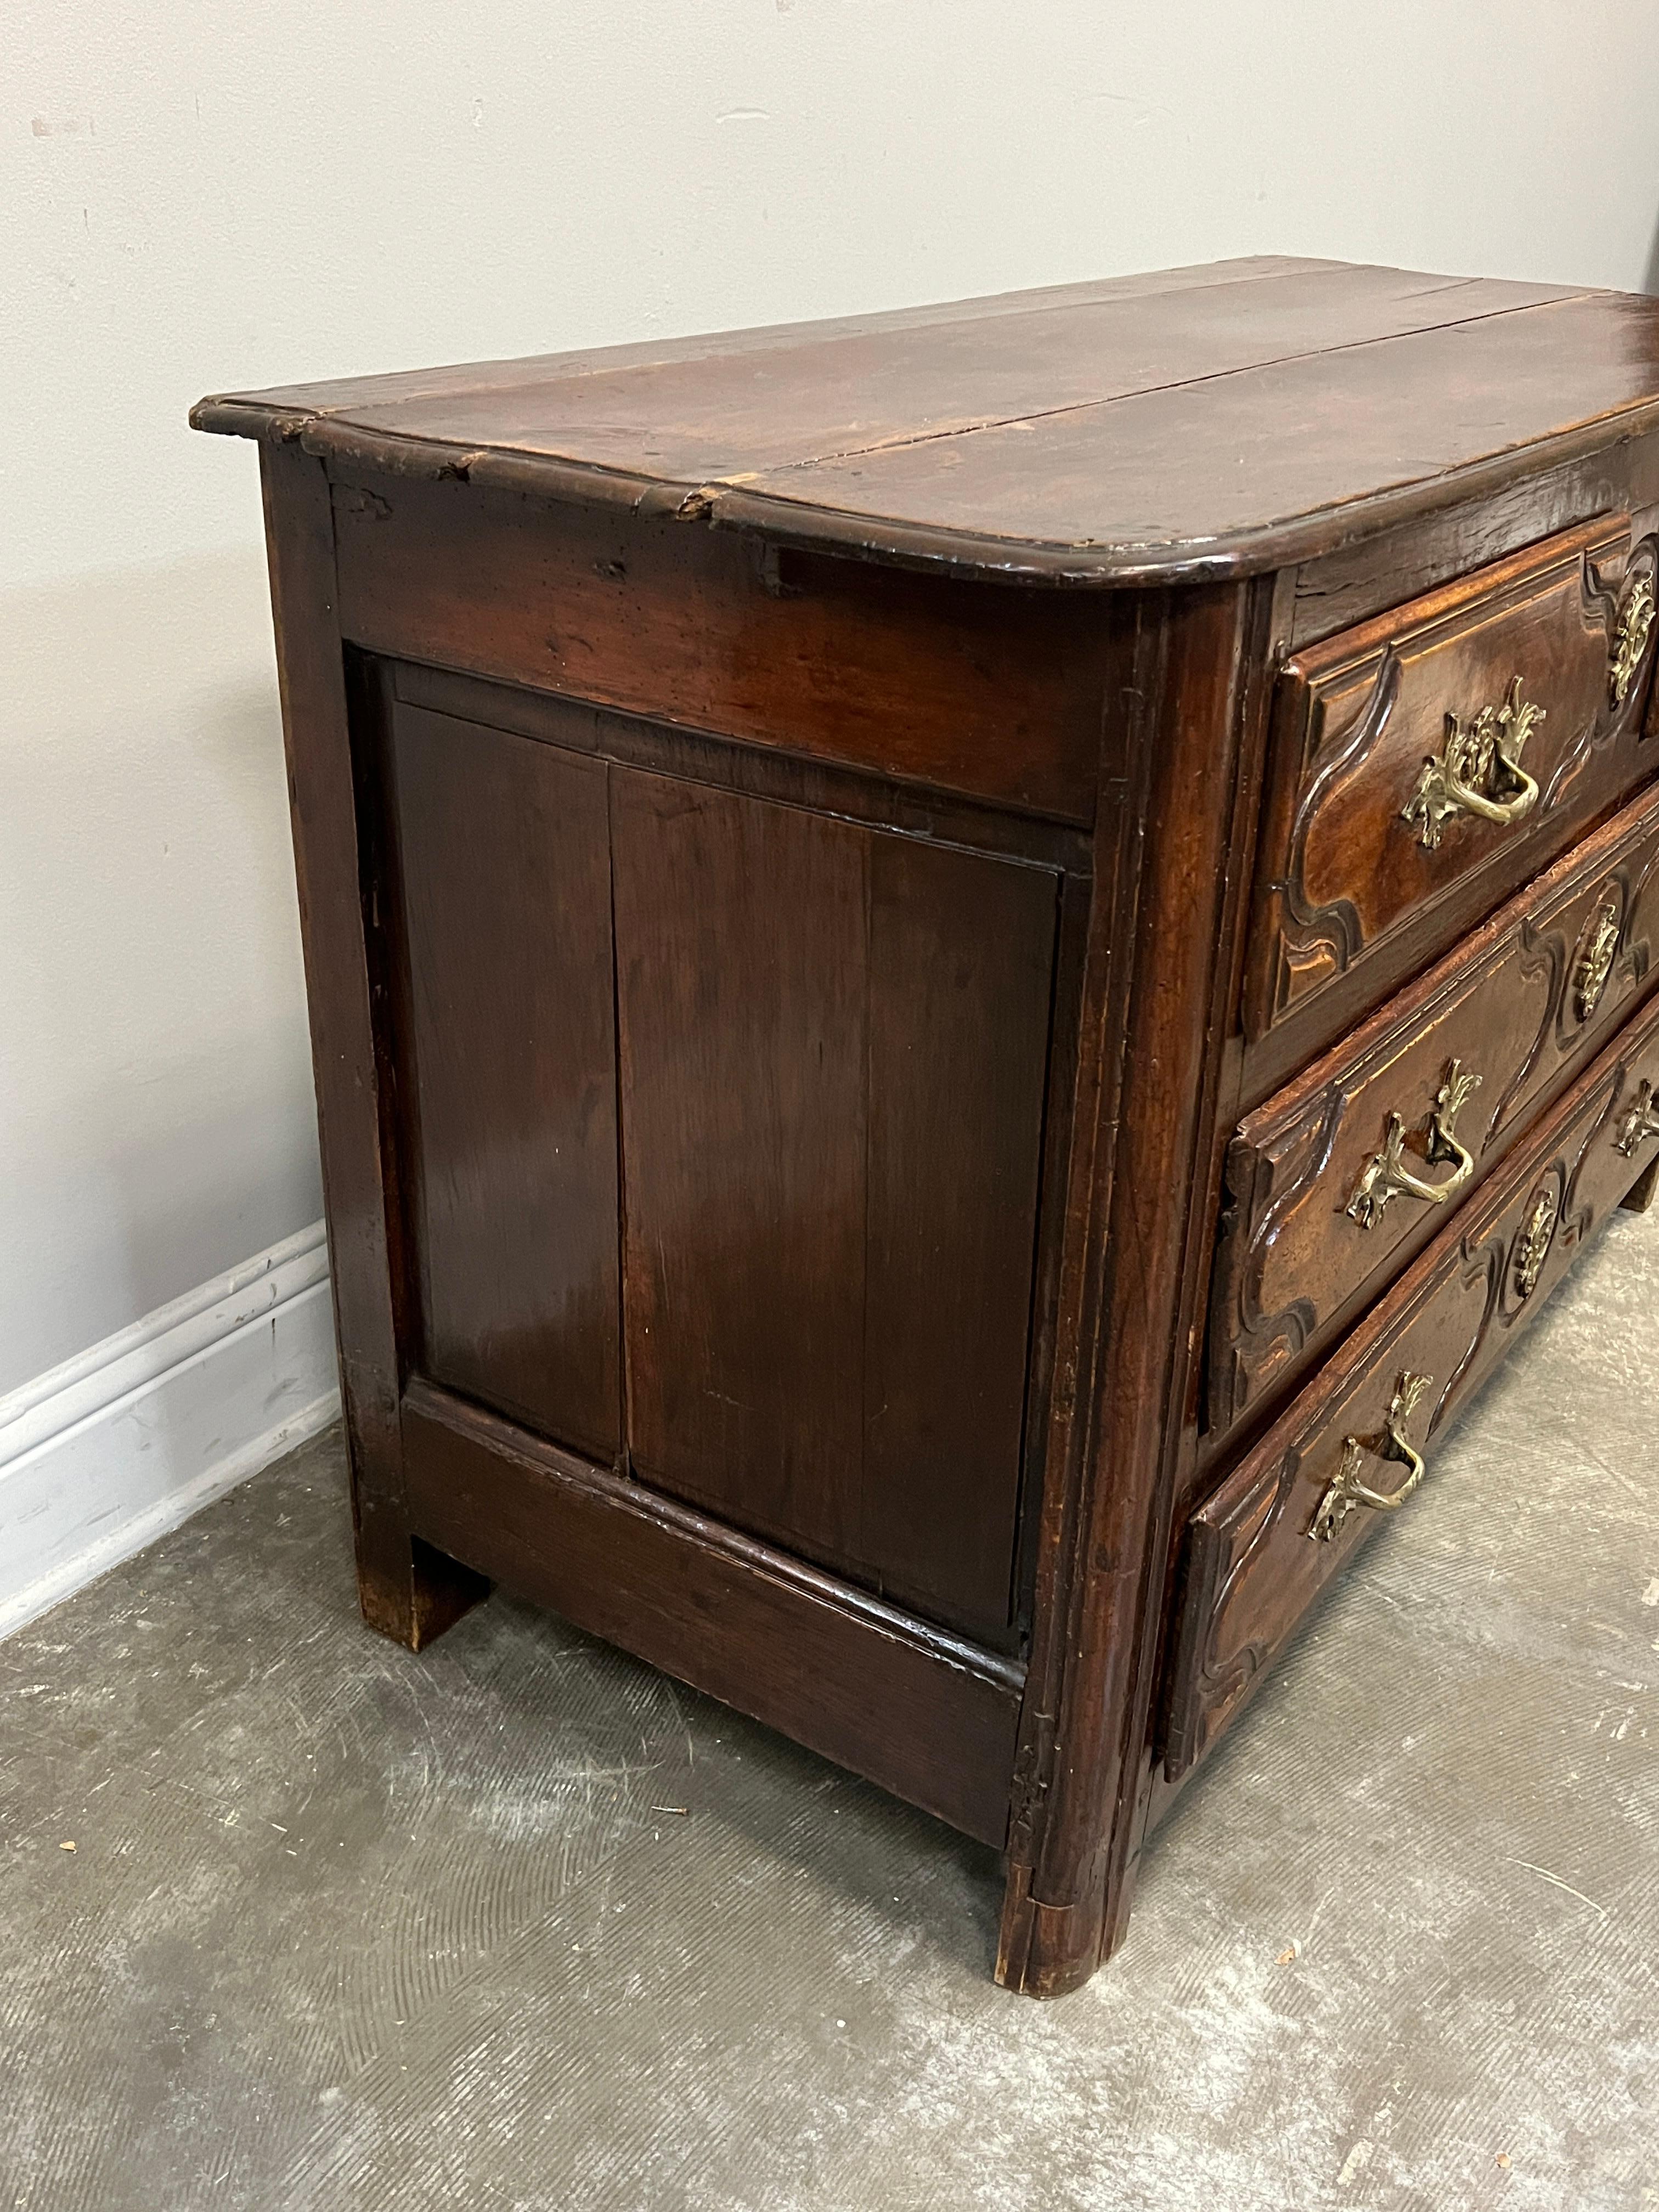 18th Century Transitional Louis XV to Louis XVI French Commode In Walnut In Good Condition For Sale In Houston, US